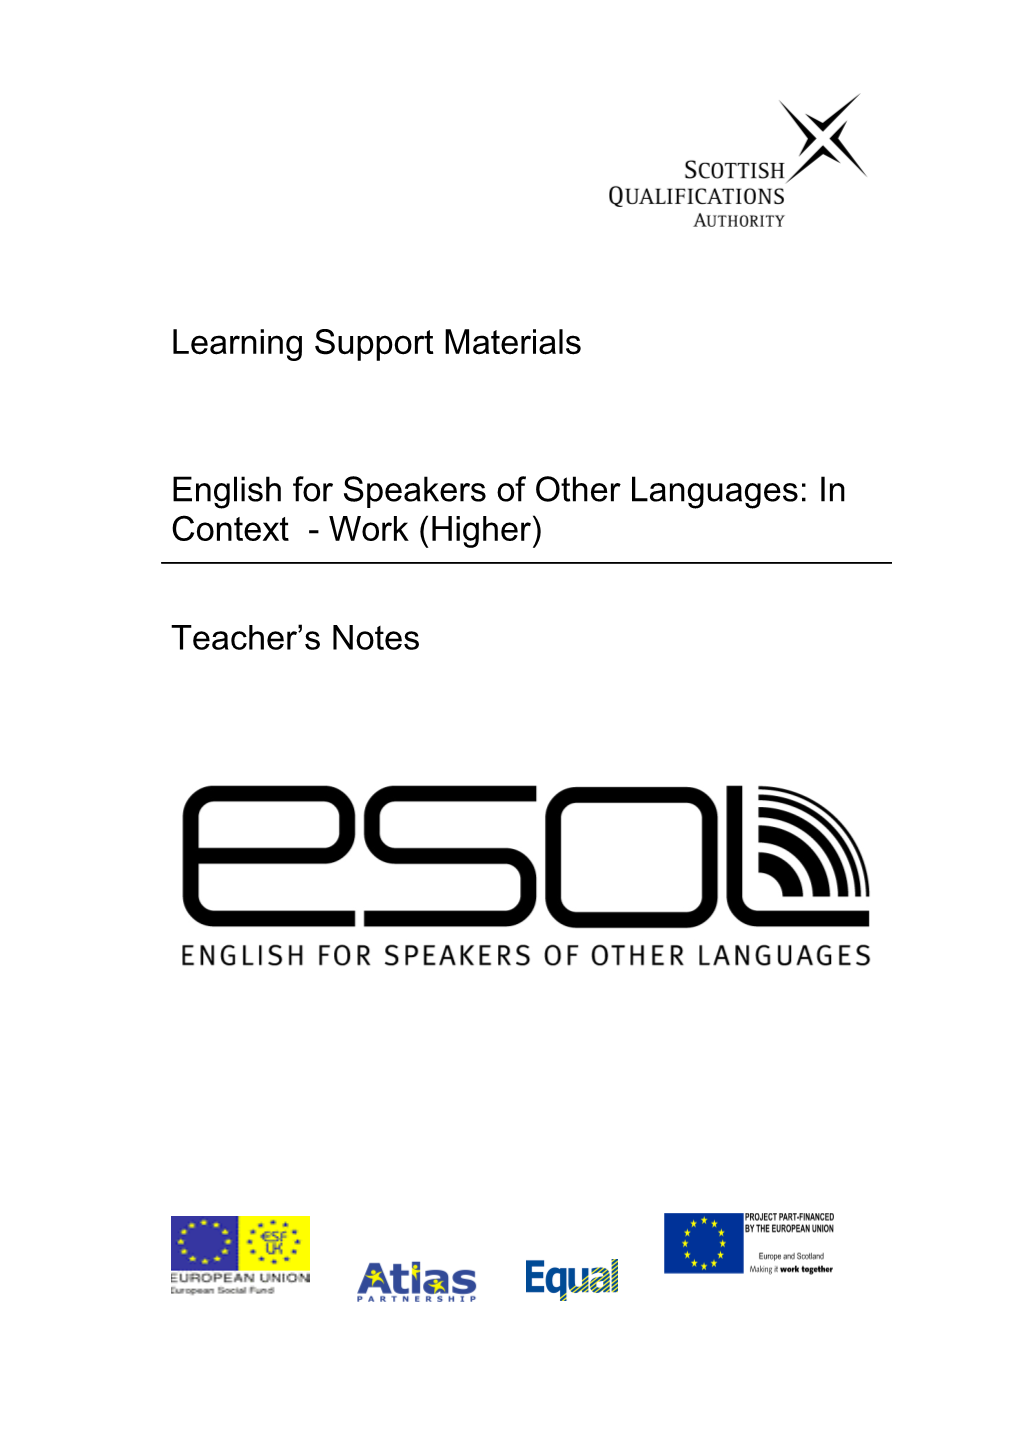 English for Speakers of Other Languages: in Context - Work (Higher)